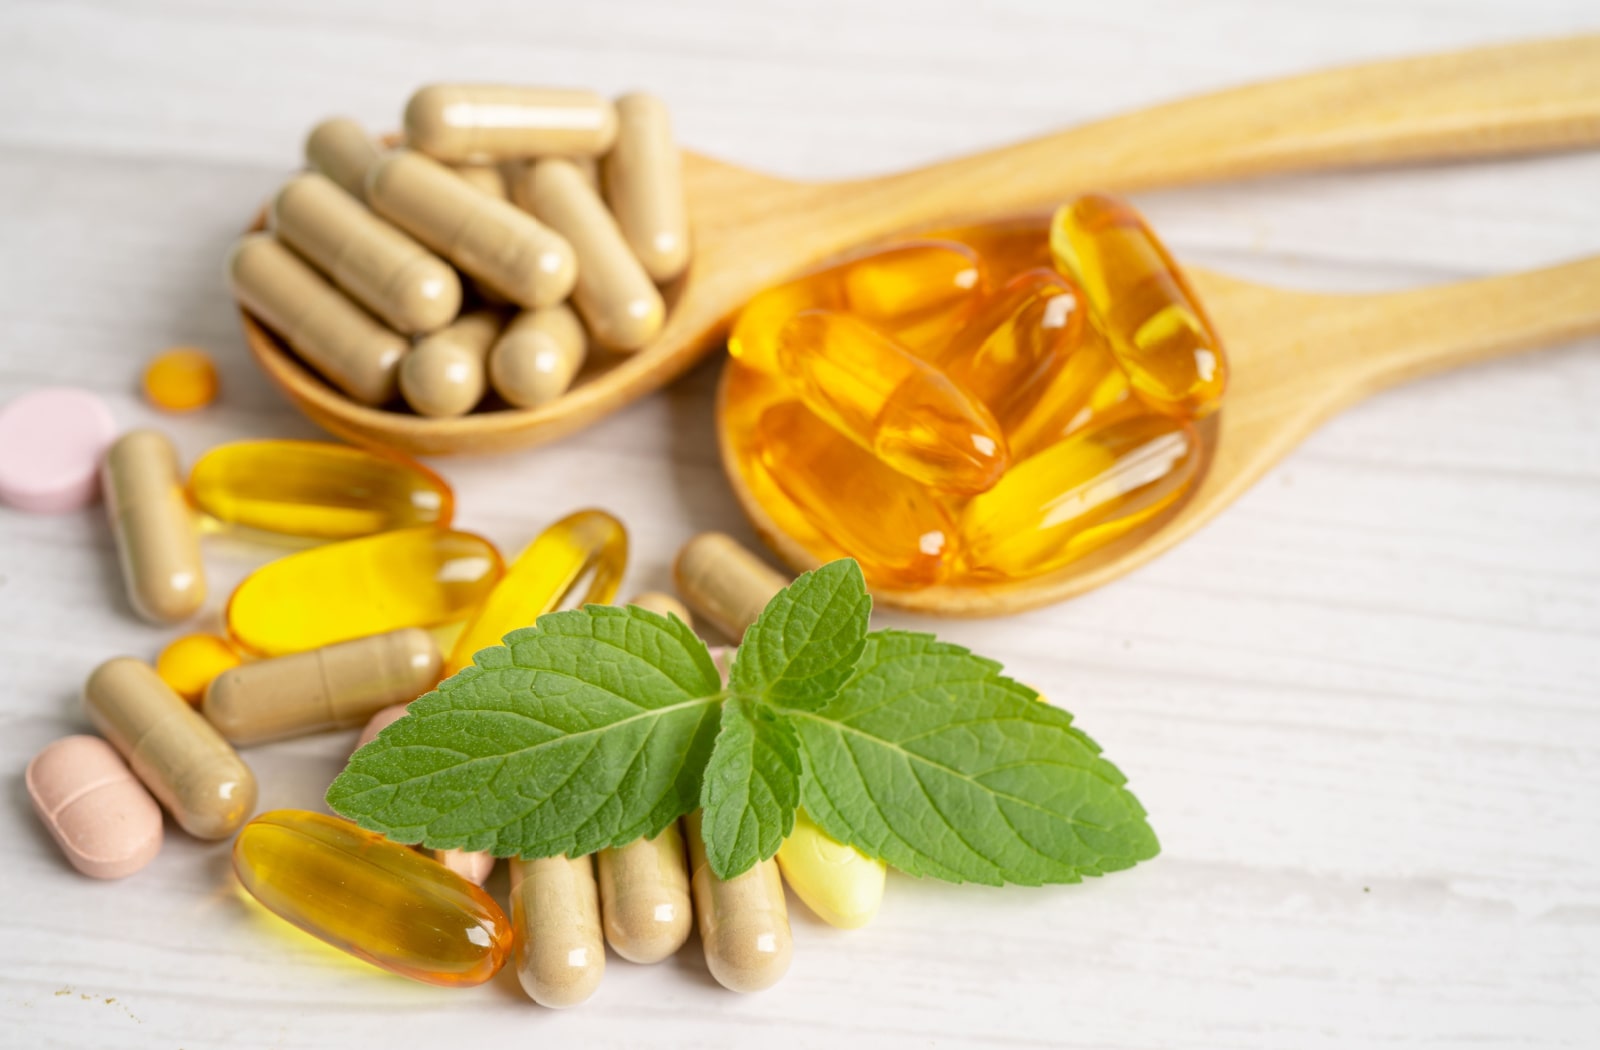 Omega 3 fish oil, vitamin A, D, and B12 supplements for dry eyes